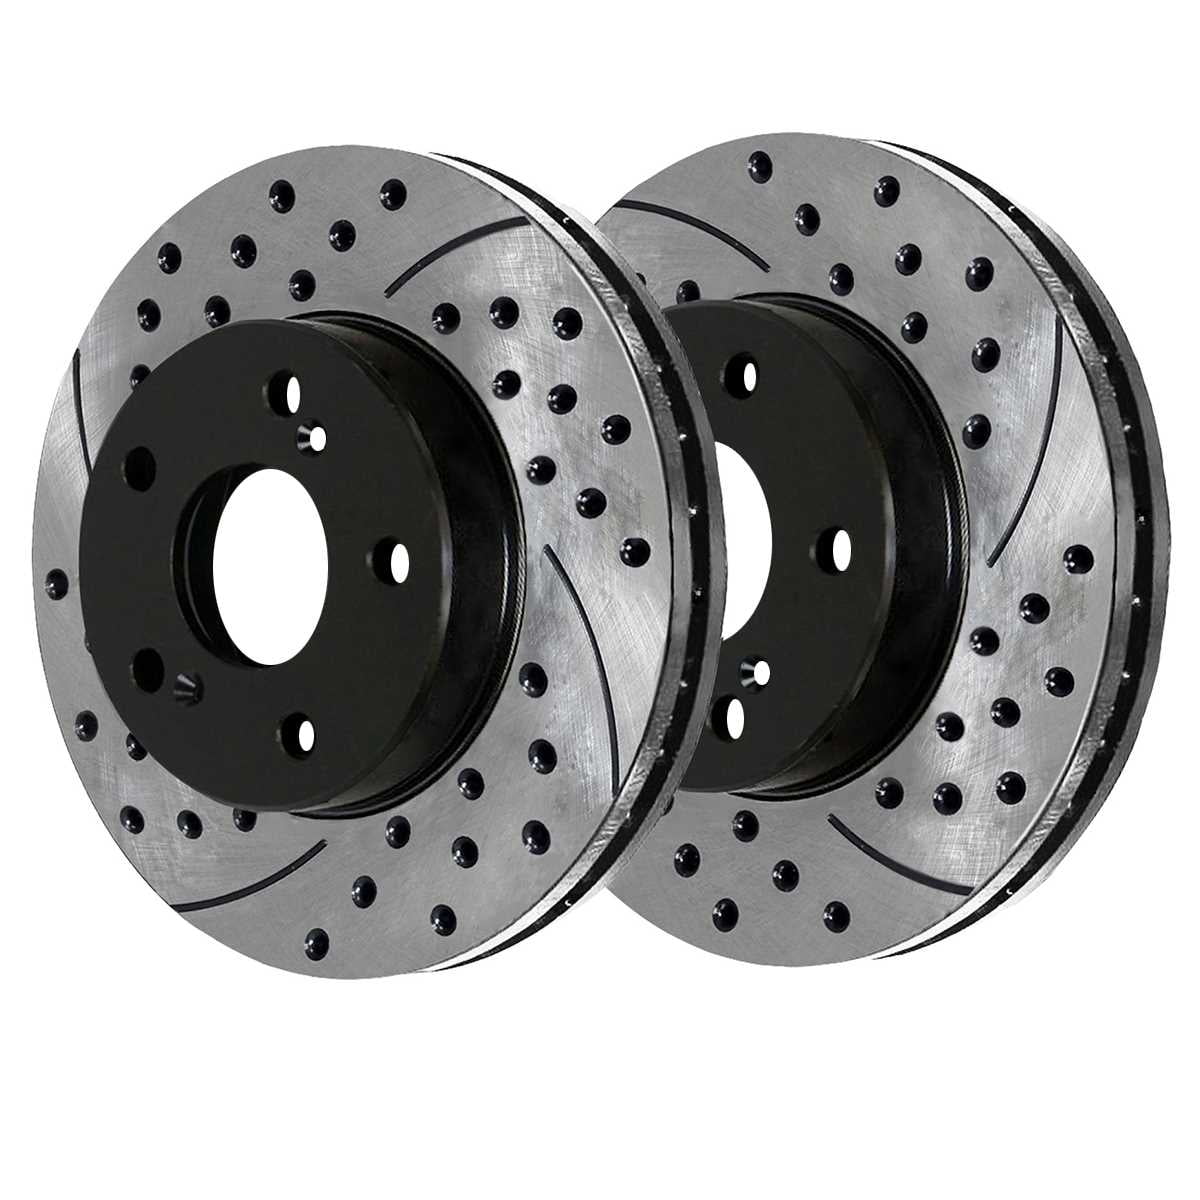 AutoShack Front Drilled Slotted Brake Rotors Black Pair of 2 Driver and  Passenger Side Replacement for Acura Legend Integra RL TL Isuzu Oasis ...